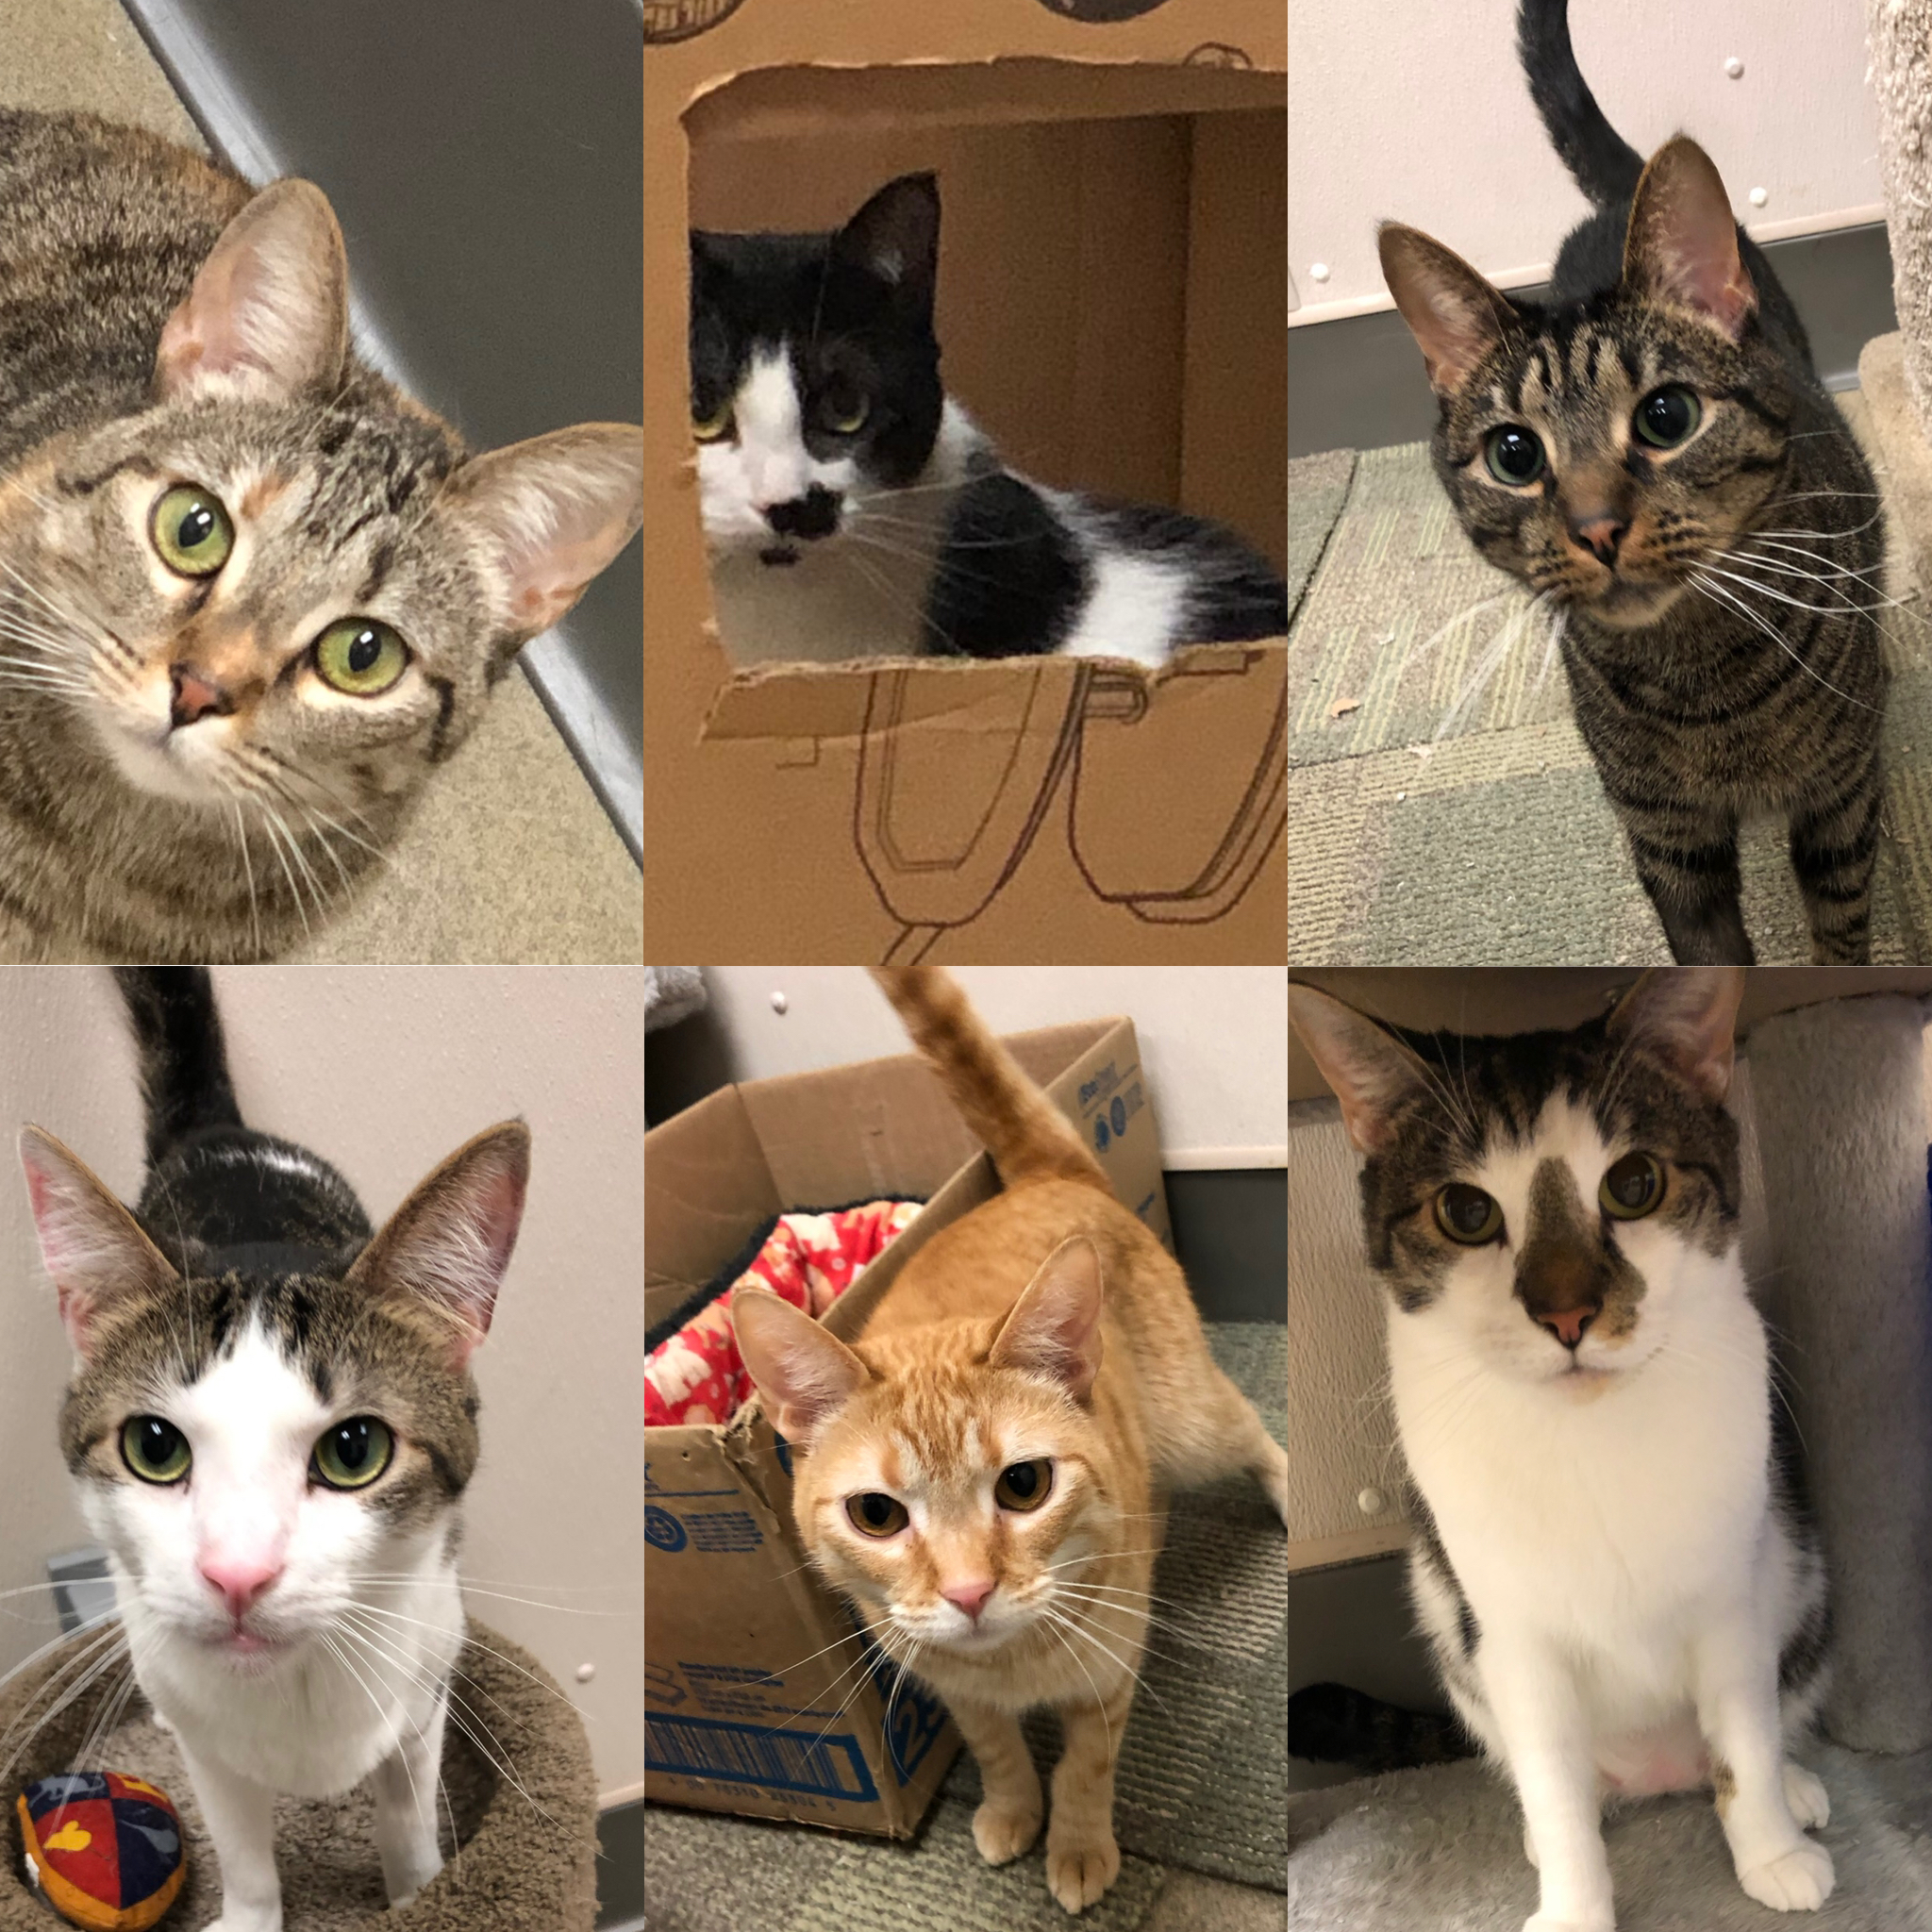 Six cats that are up for adoption.